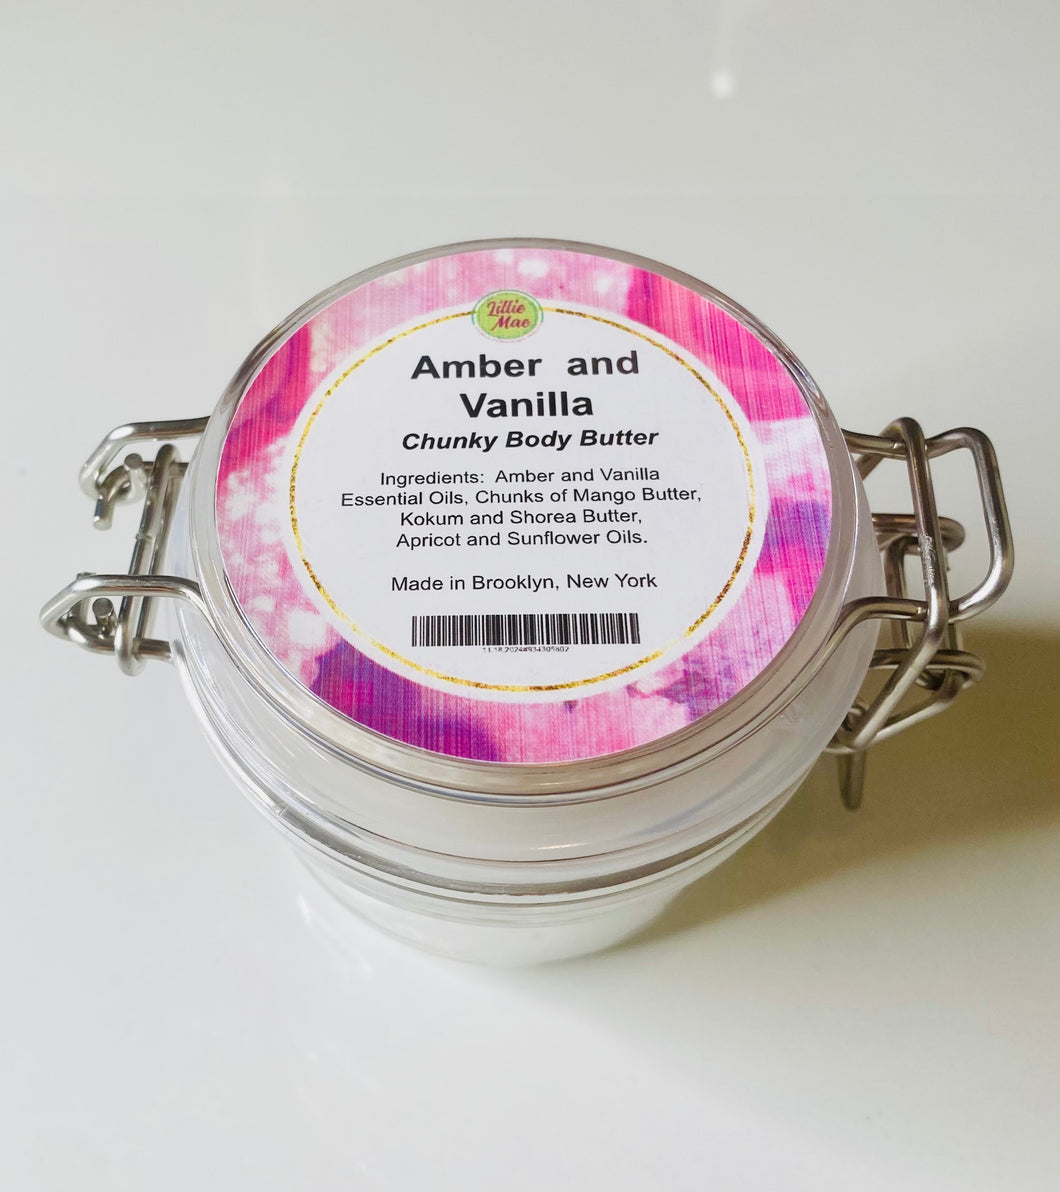 Amber and Vanilla Body Butter